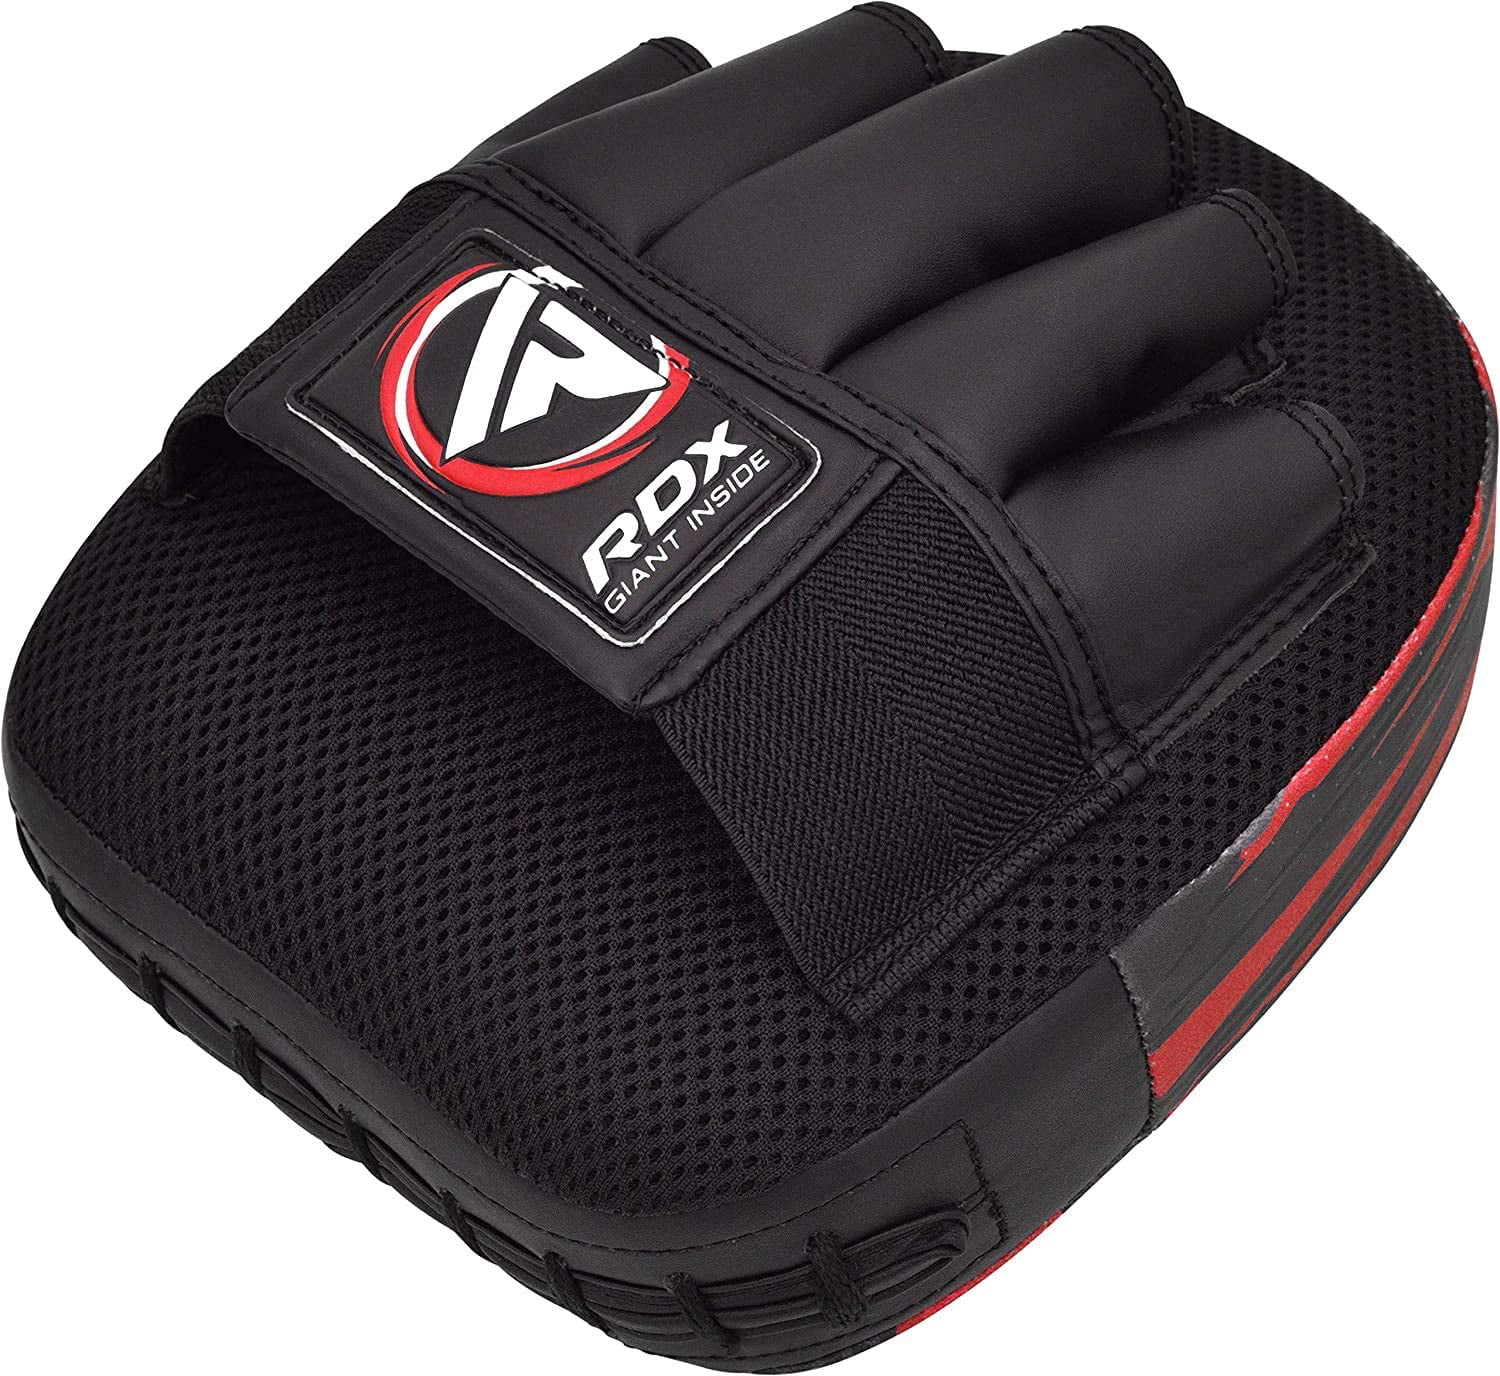 RDX Kids Boxing Pads Focus Mitts Martial Arts Kickboxing and Karate Training Maya hide leather Curved Junior Hook and Jab Target Hand Pads Muay Thai Great for Youth MMA Coaching Strike Shield